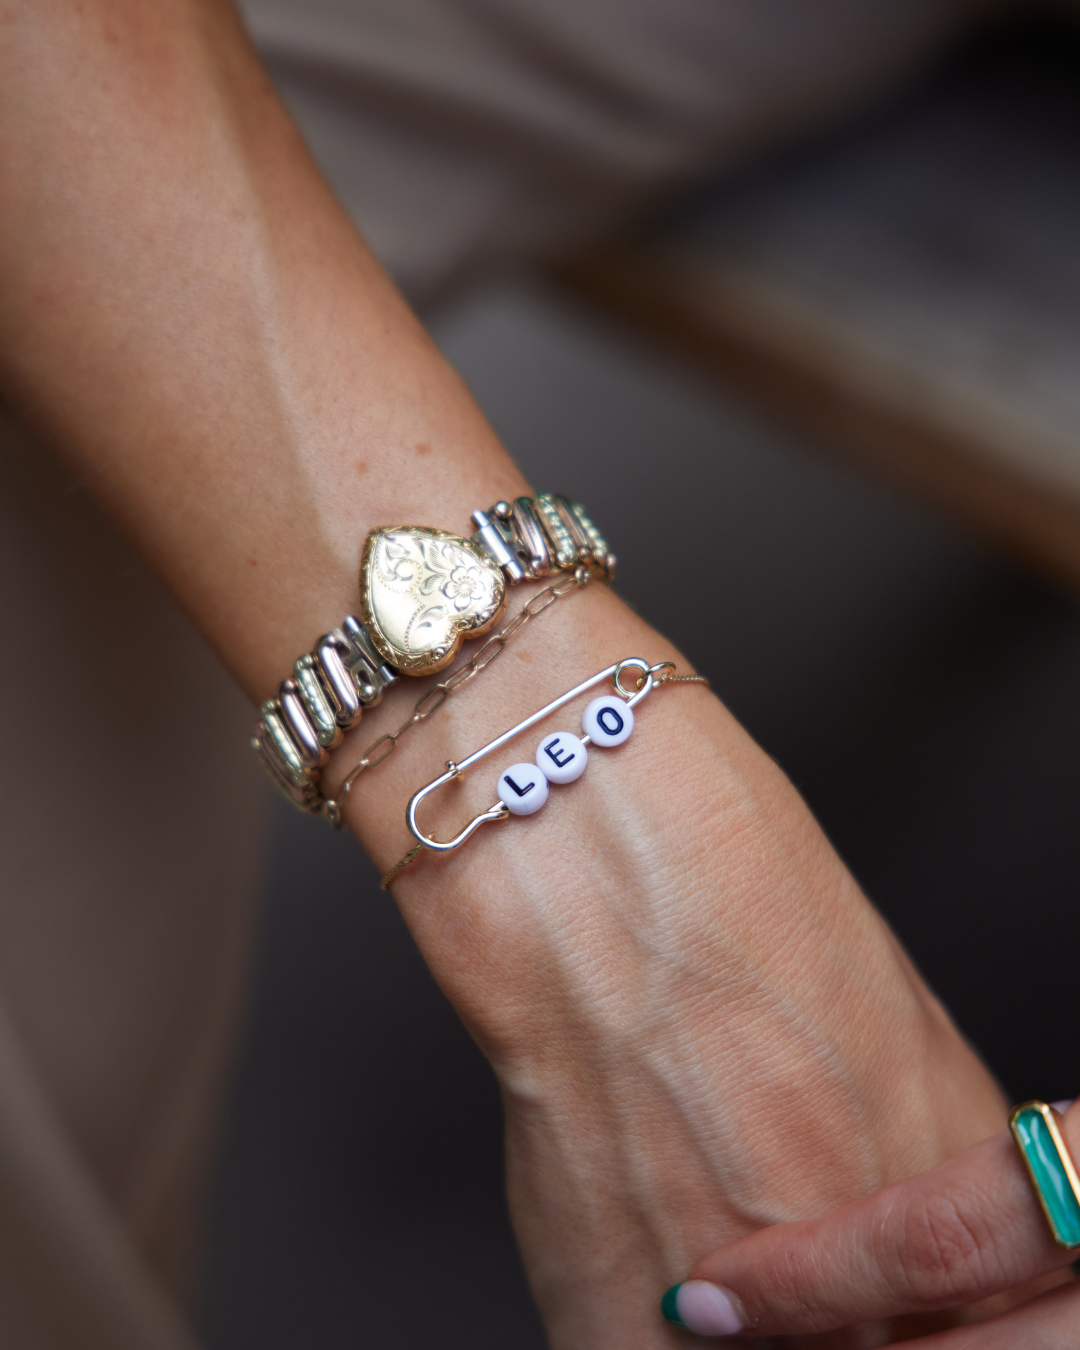 safety pin bracelet | Nickel and Suede